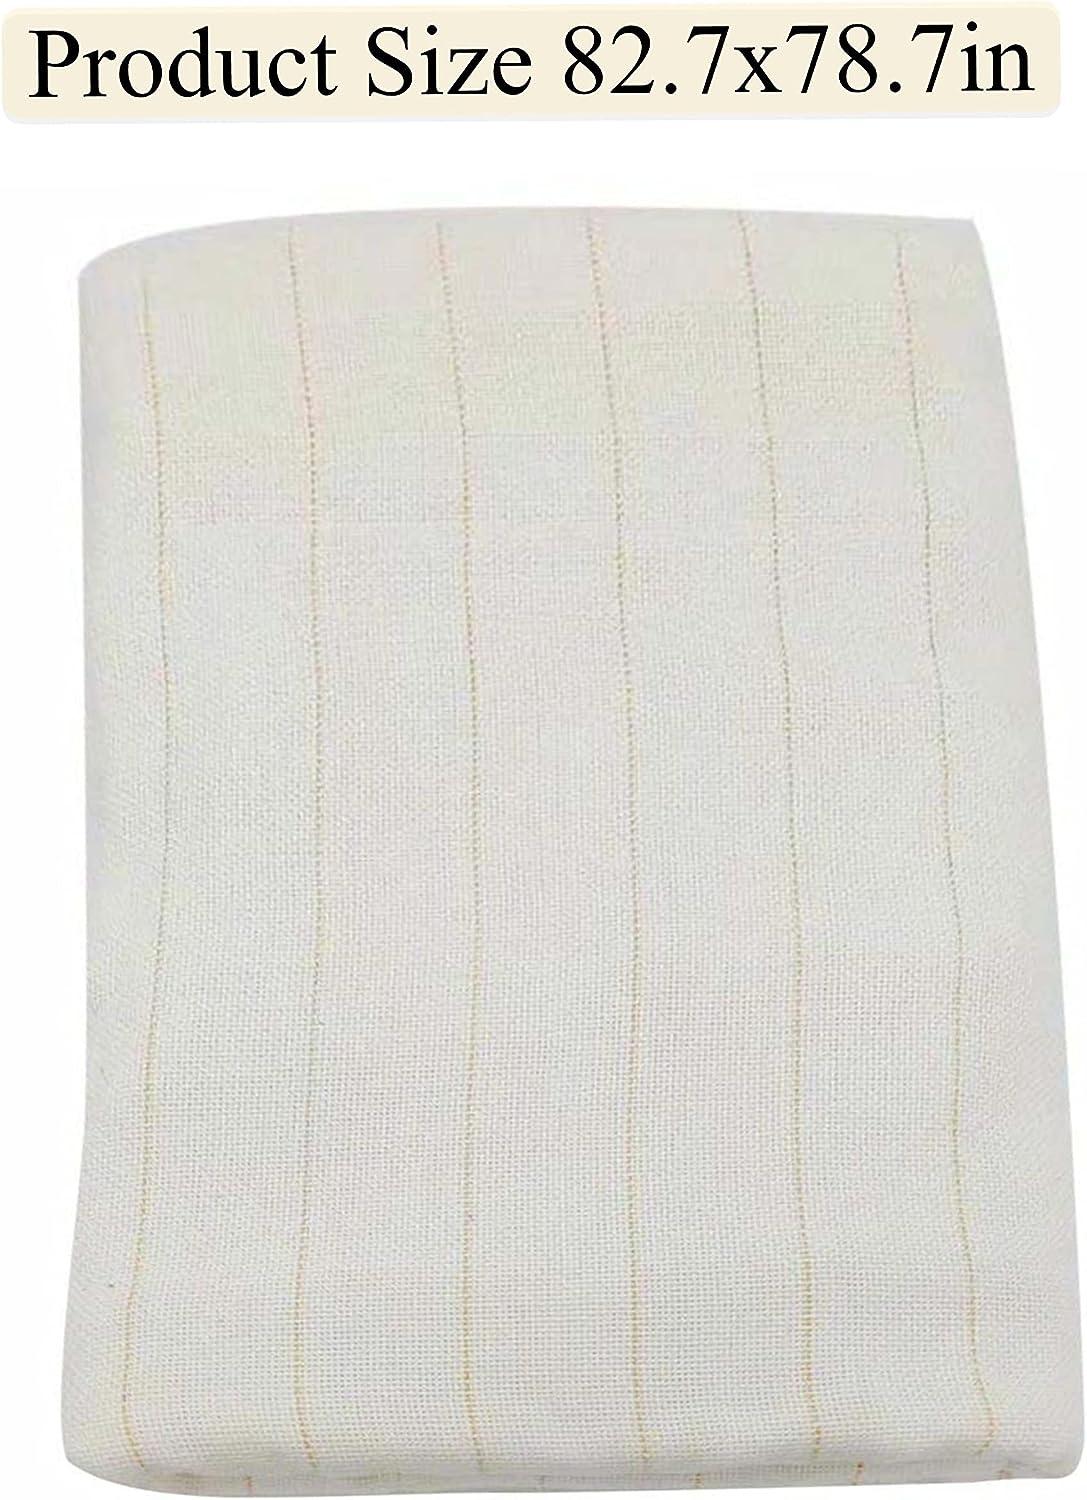 TWSOUL Primary Tufting Cloth with Marked Lines, Monk Cloth